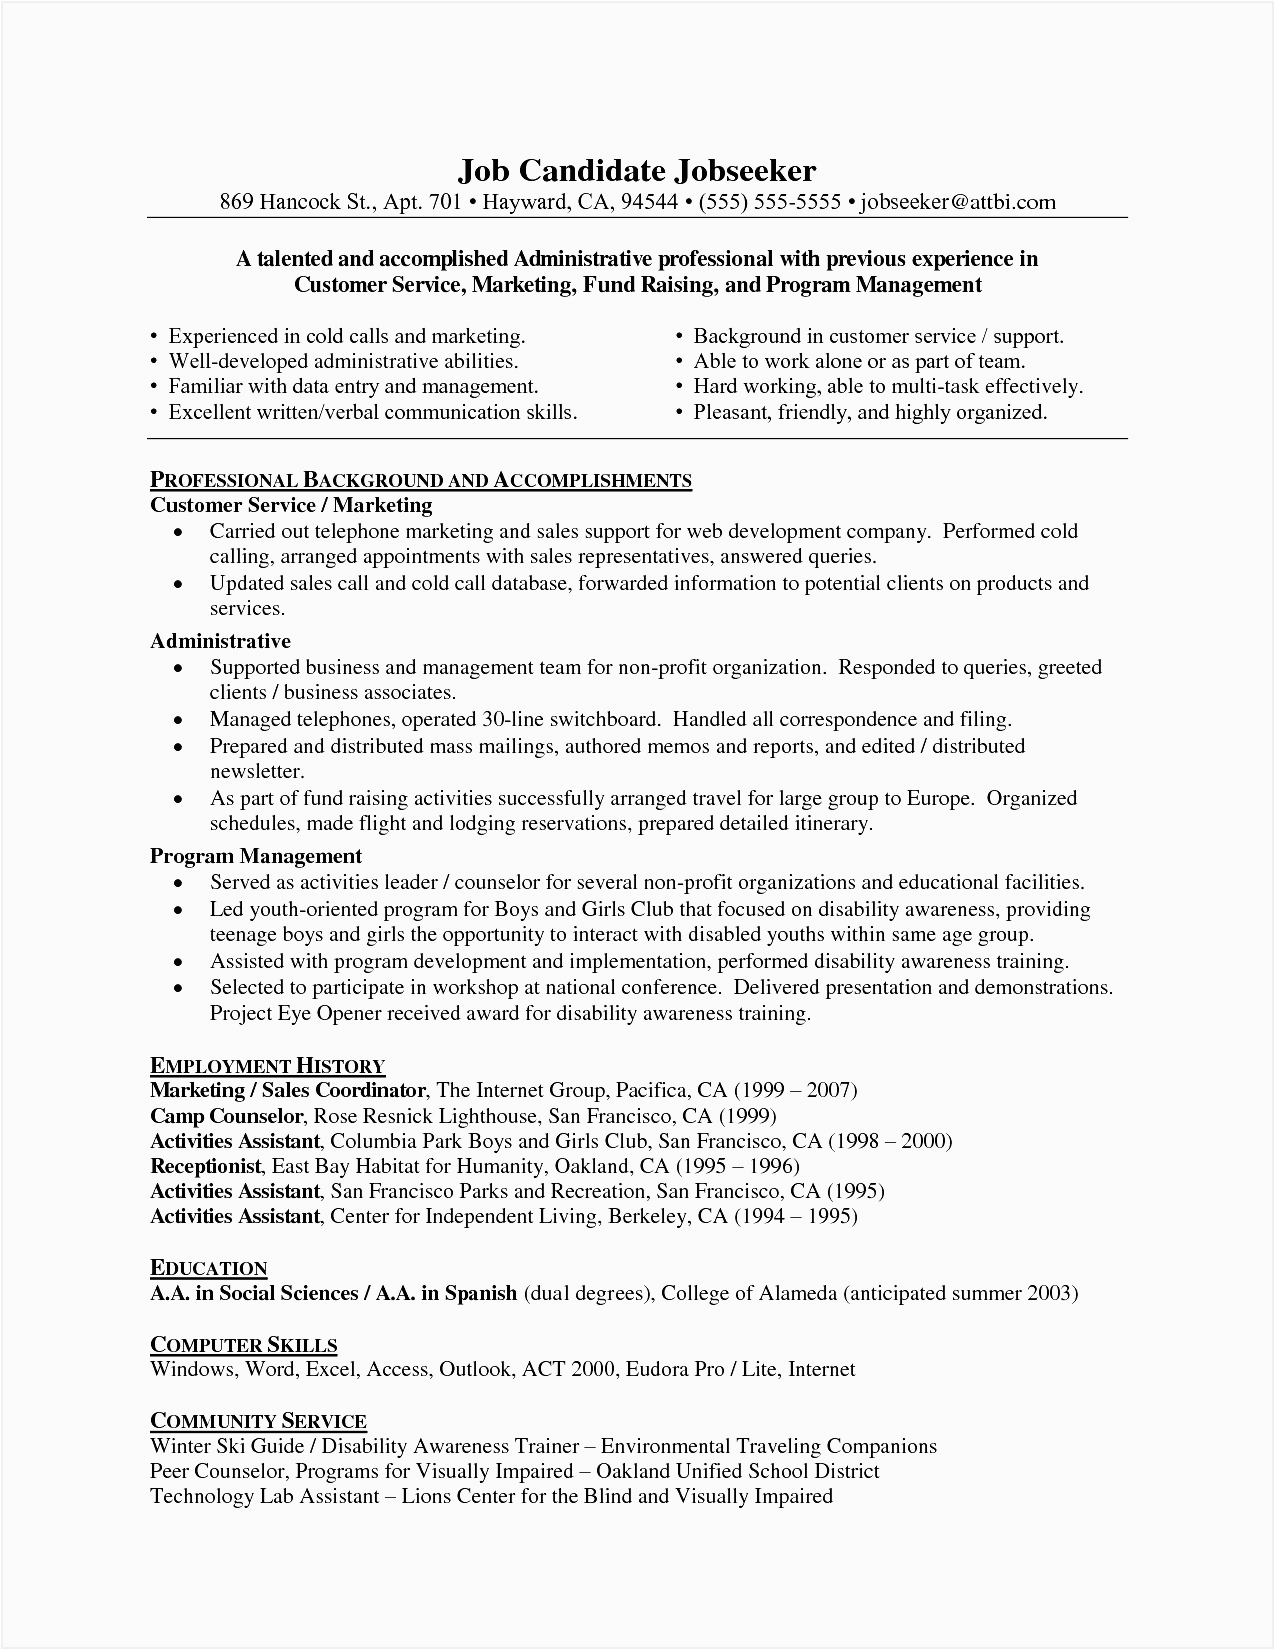 Sample Resume for Csr with No Experience 7 Cv Template No Experience